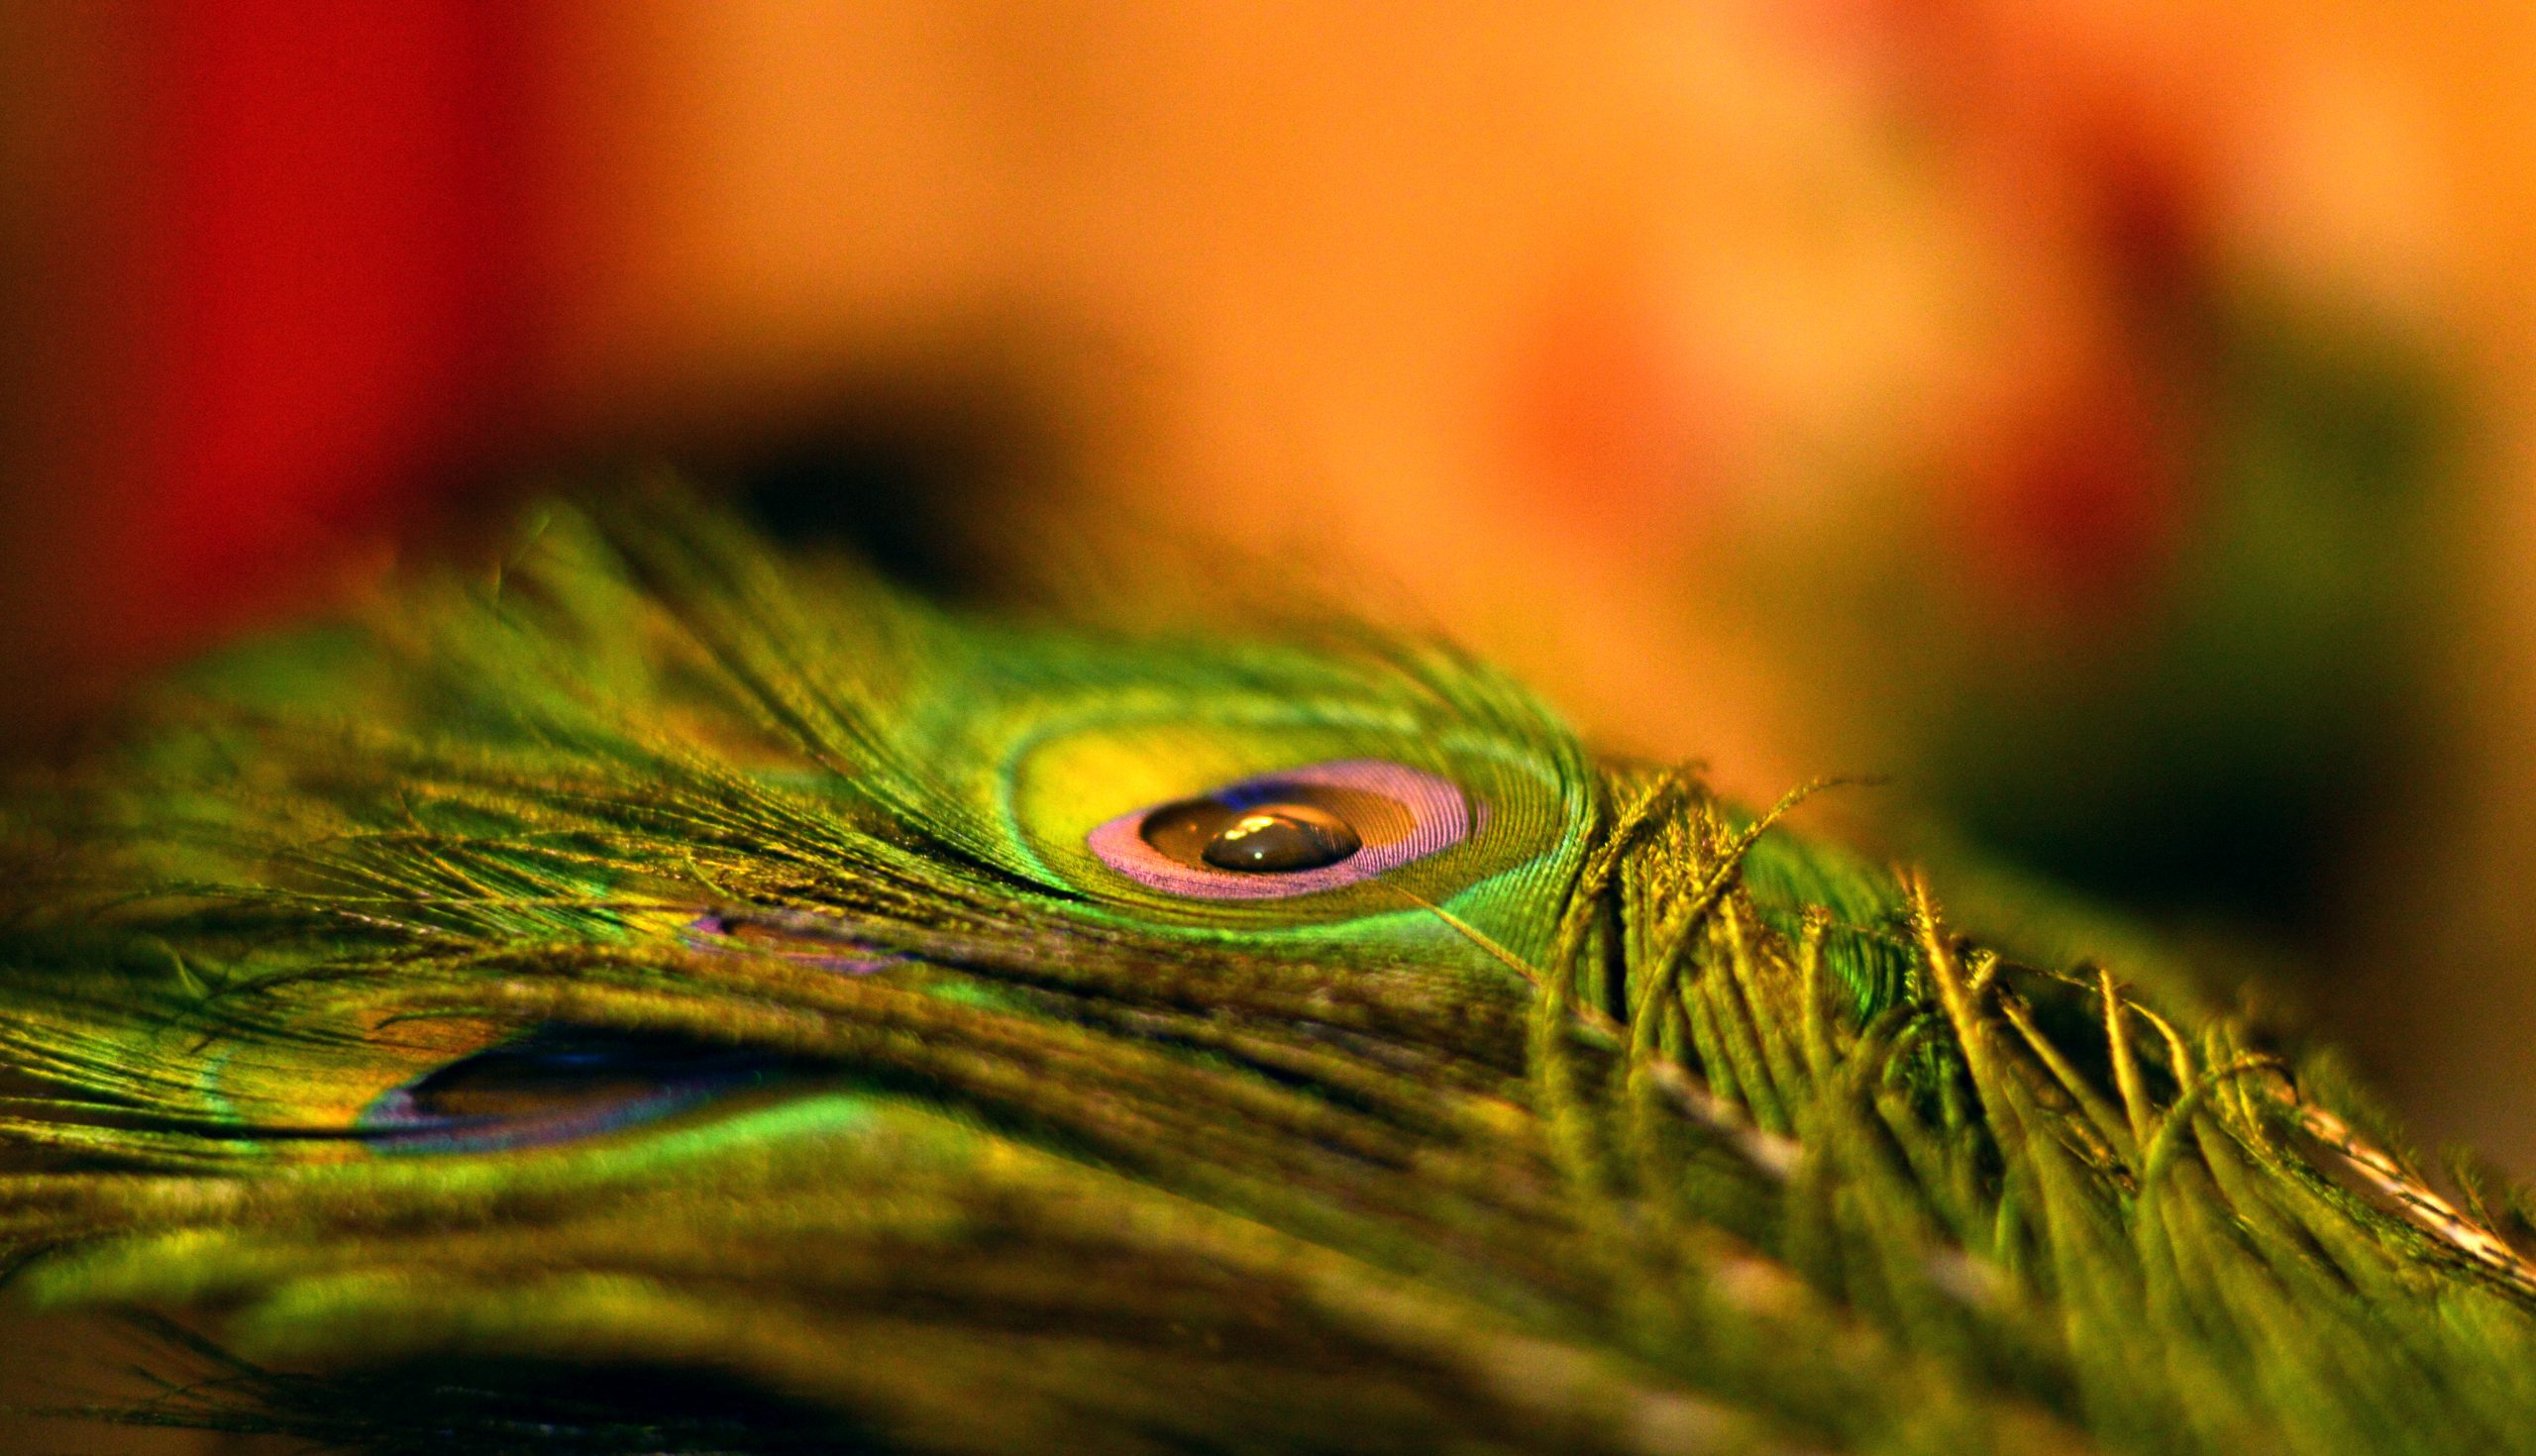 Feather of a peacock